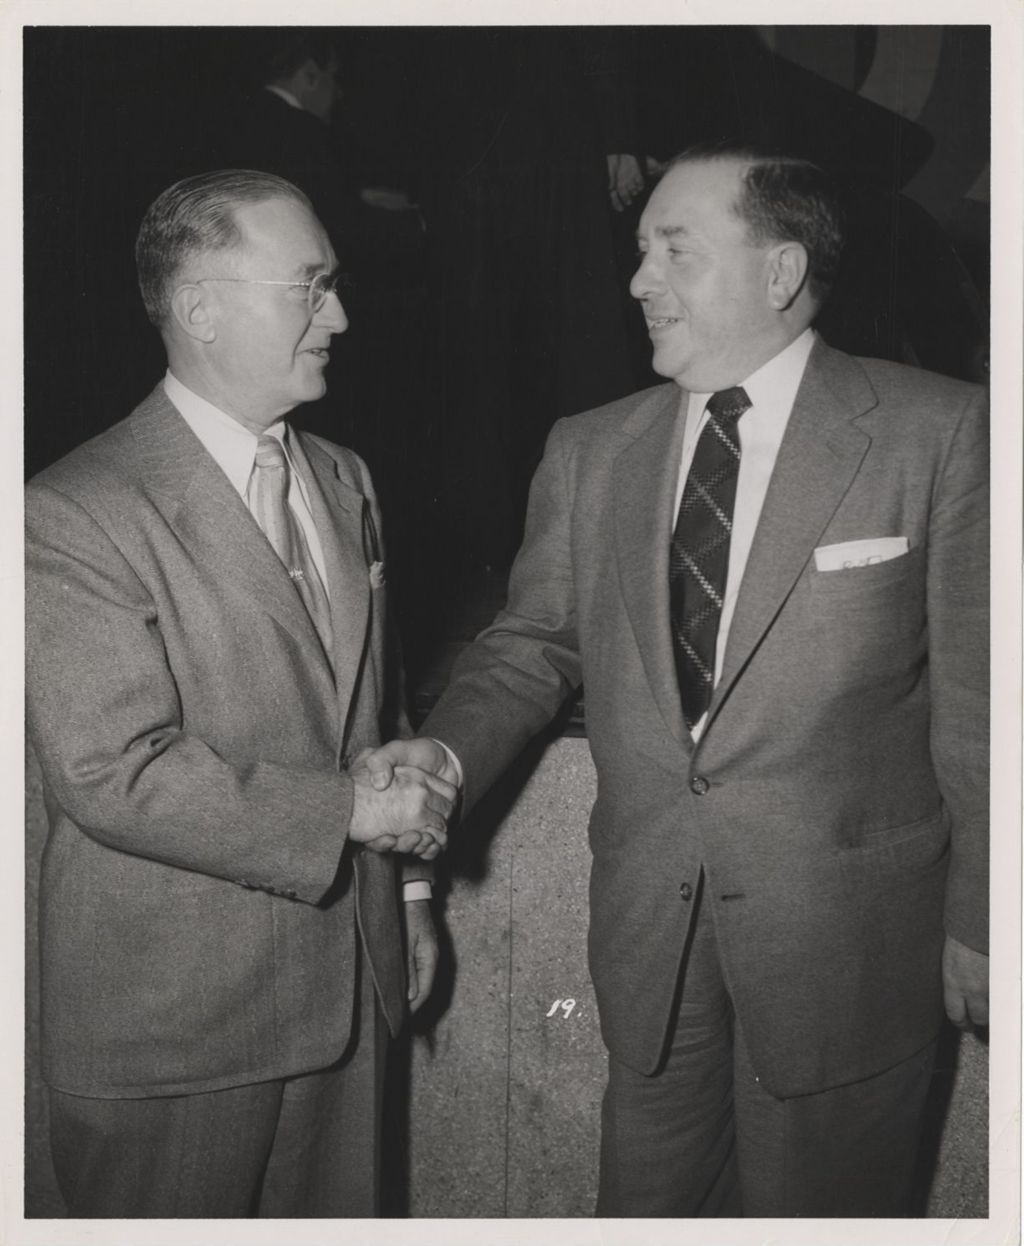 Miniature of Richard J. Daley shaking hands with Dr. Karl A. Meyer